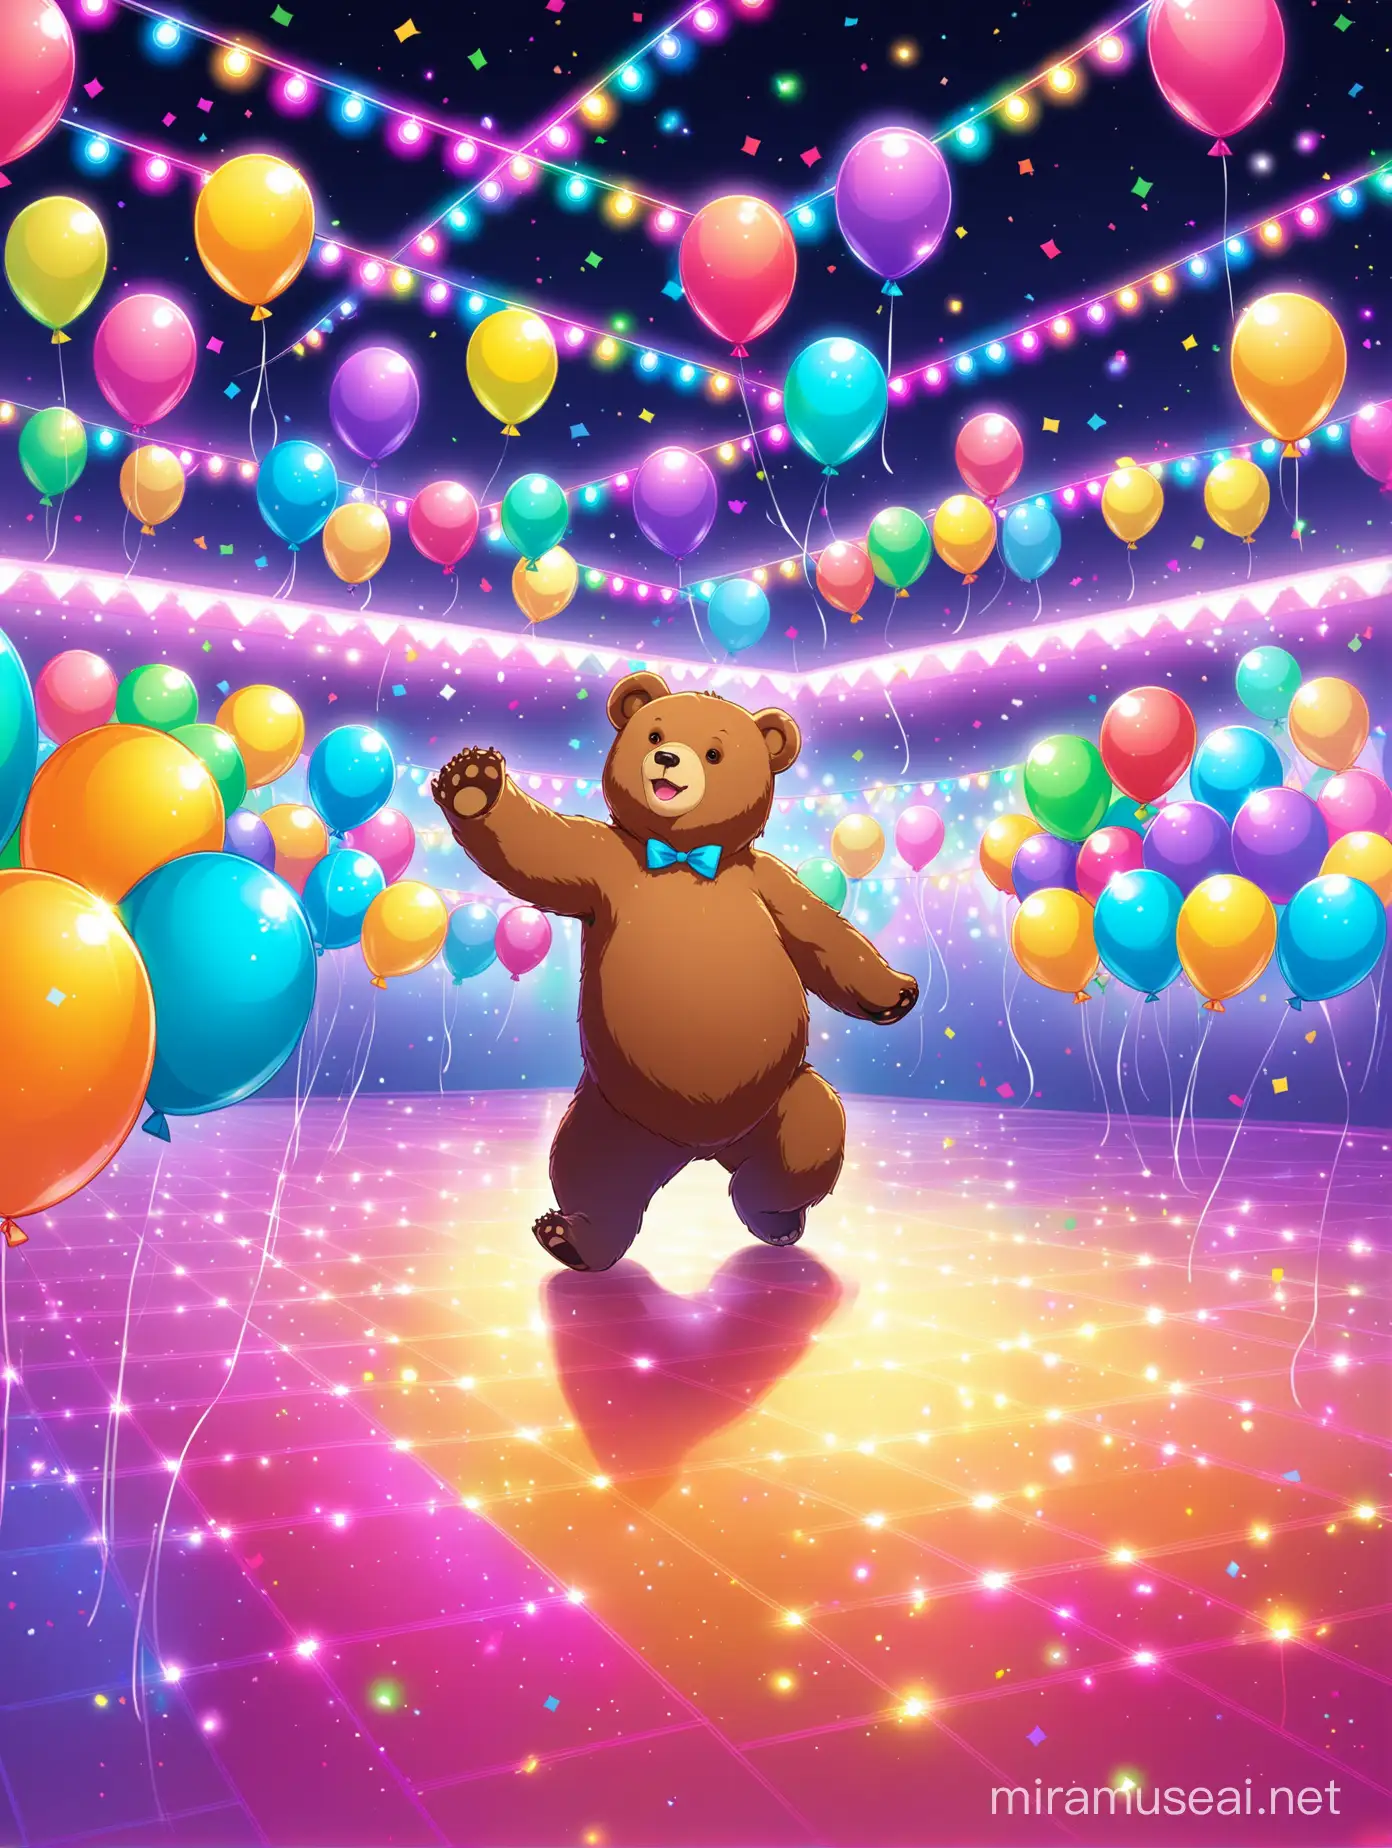 Bear dancing on the dance floor, all around empty, but there are colorful lights and balloons, everything looks like a good party